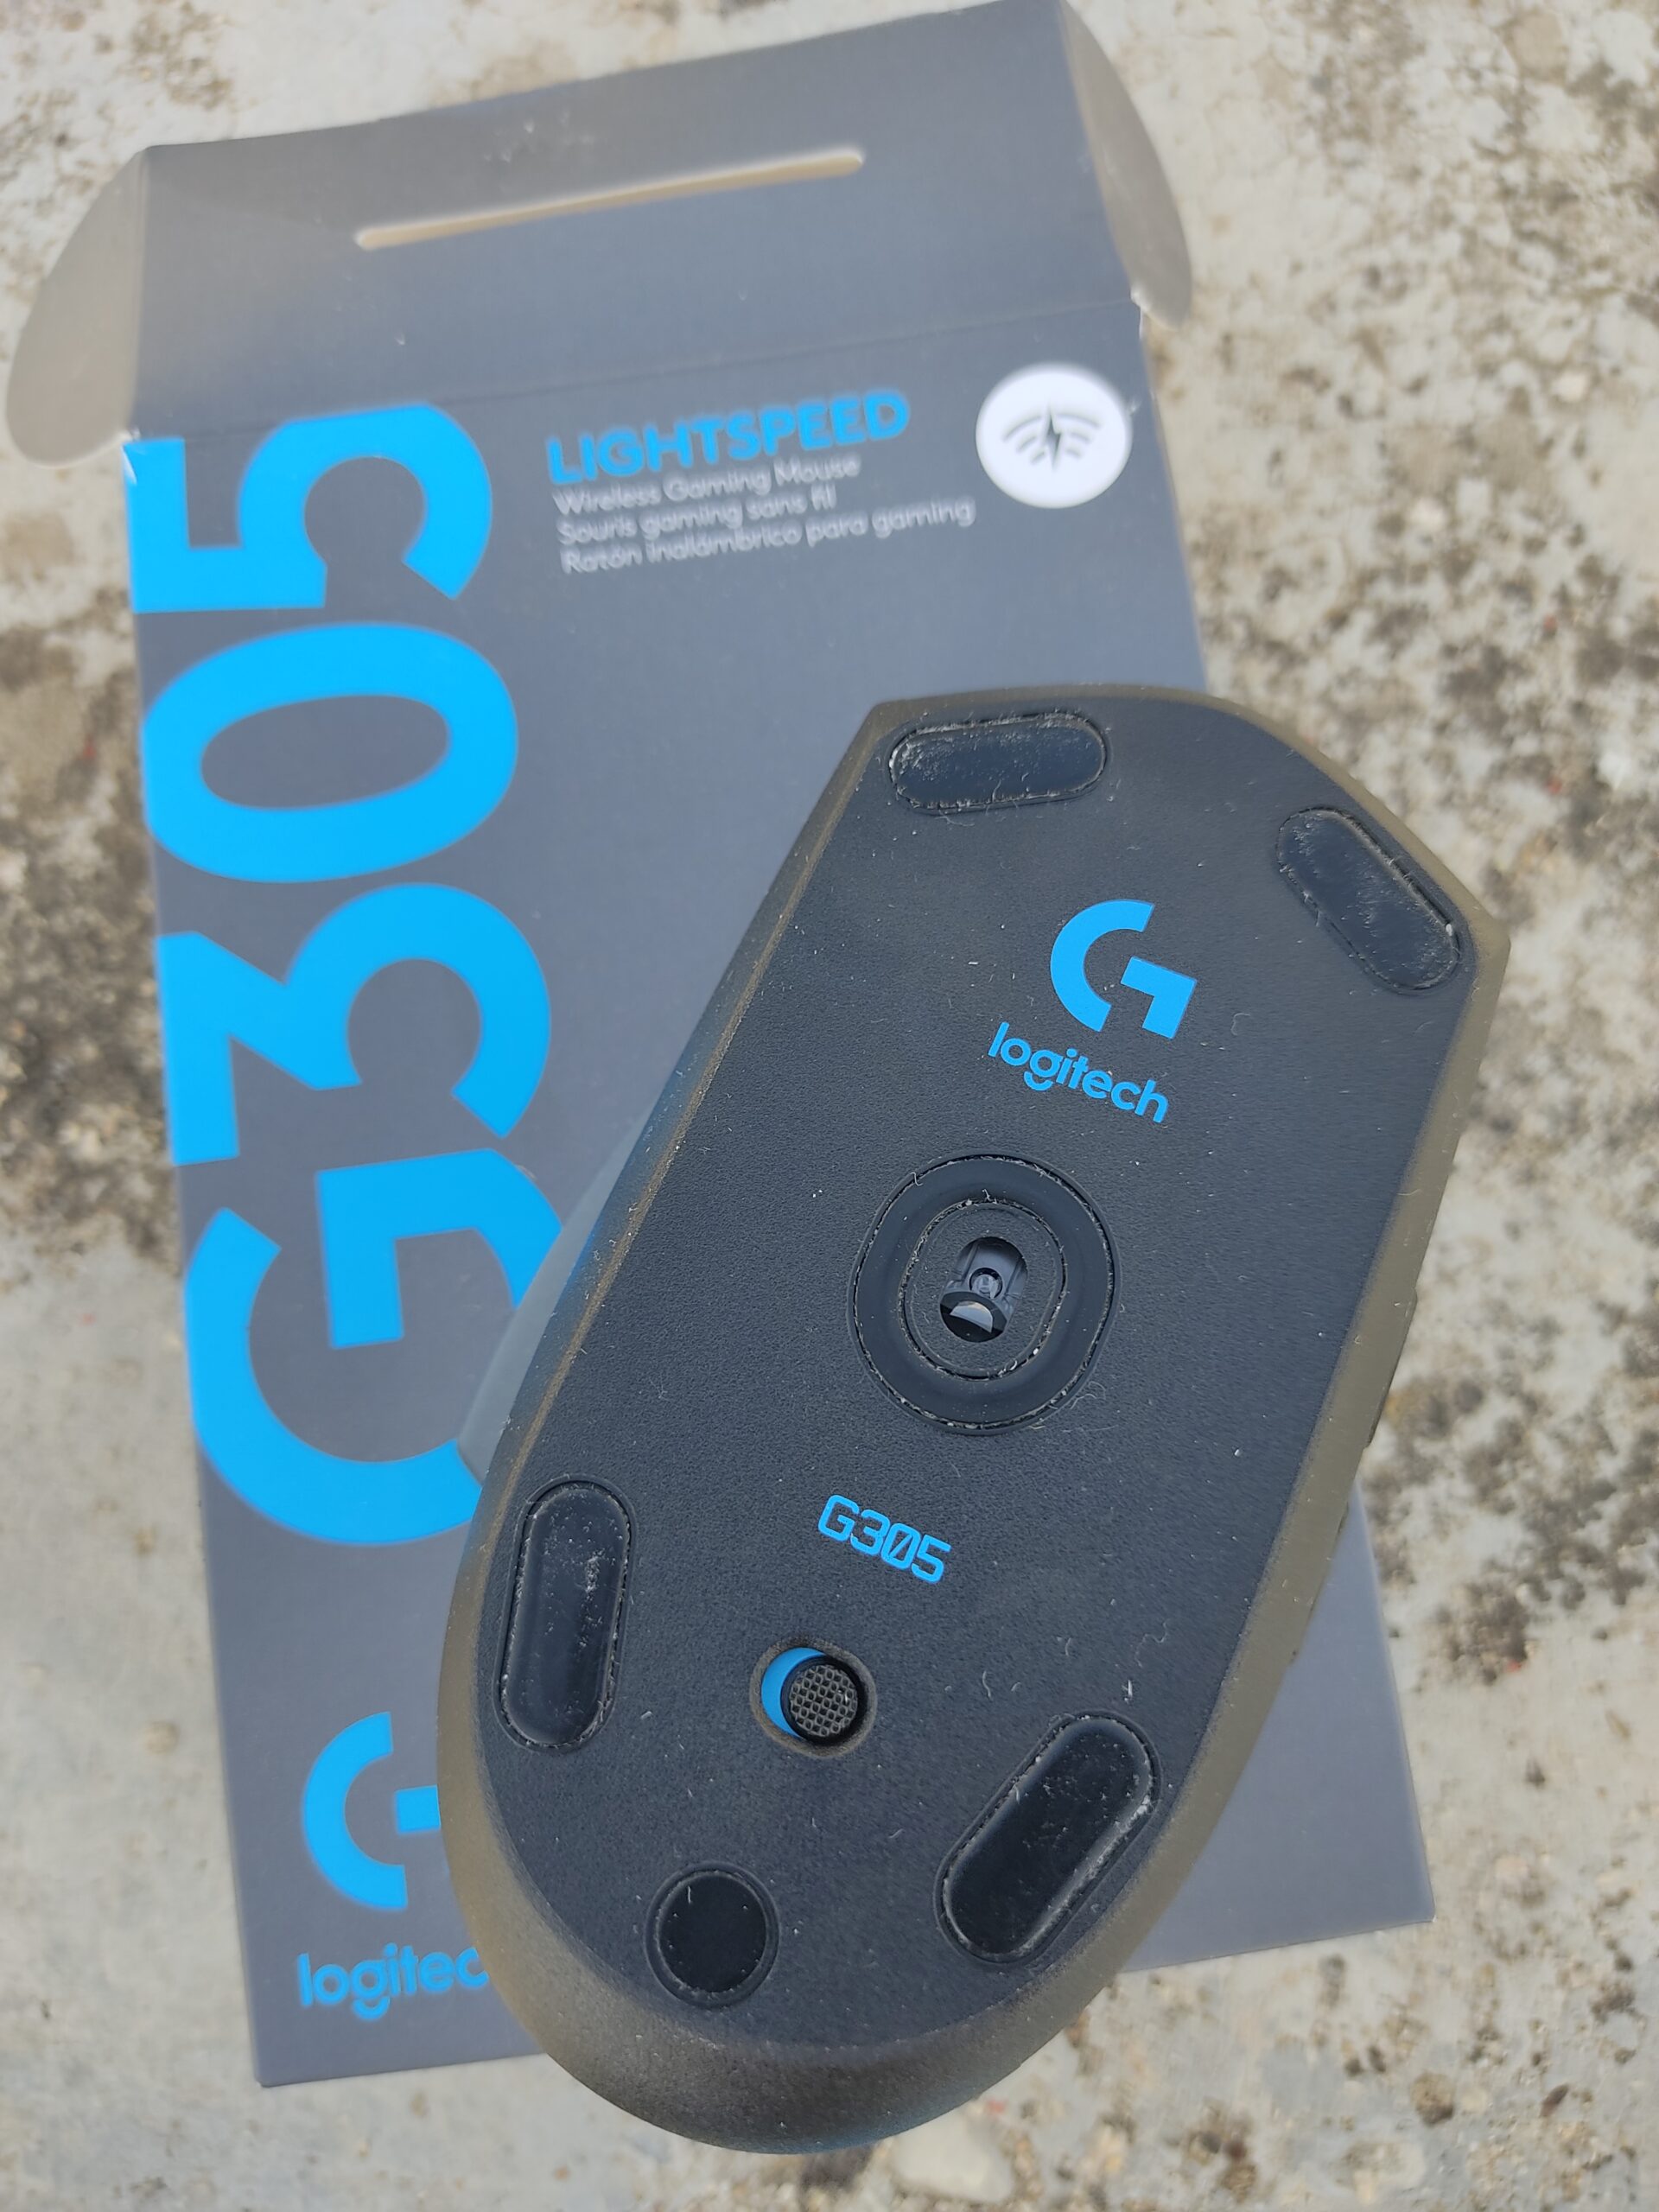 WIRELESS GAMING Mouse LOGITECH G305